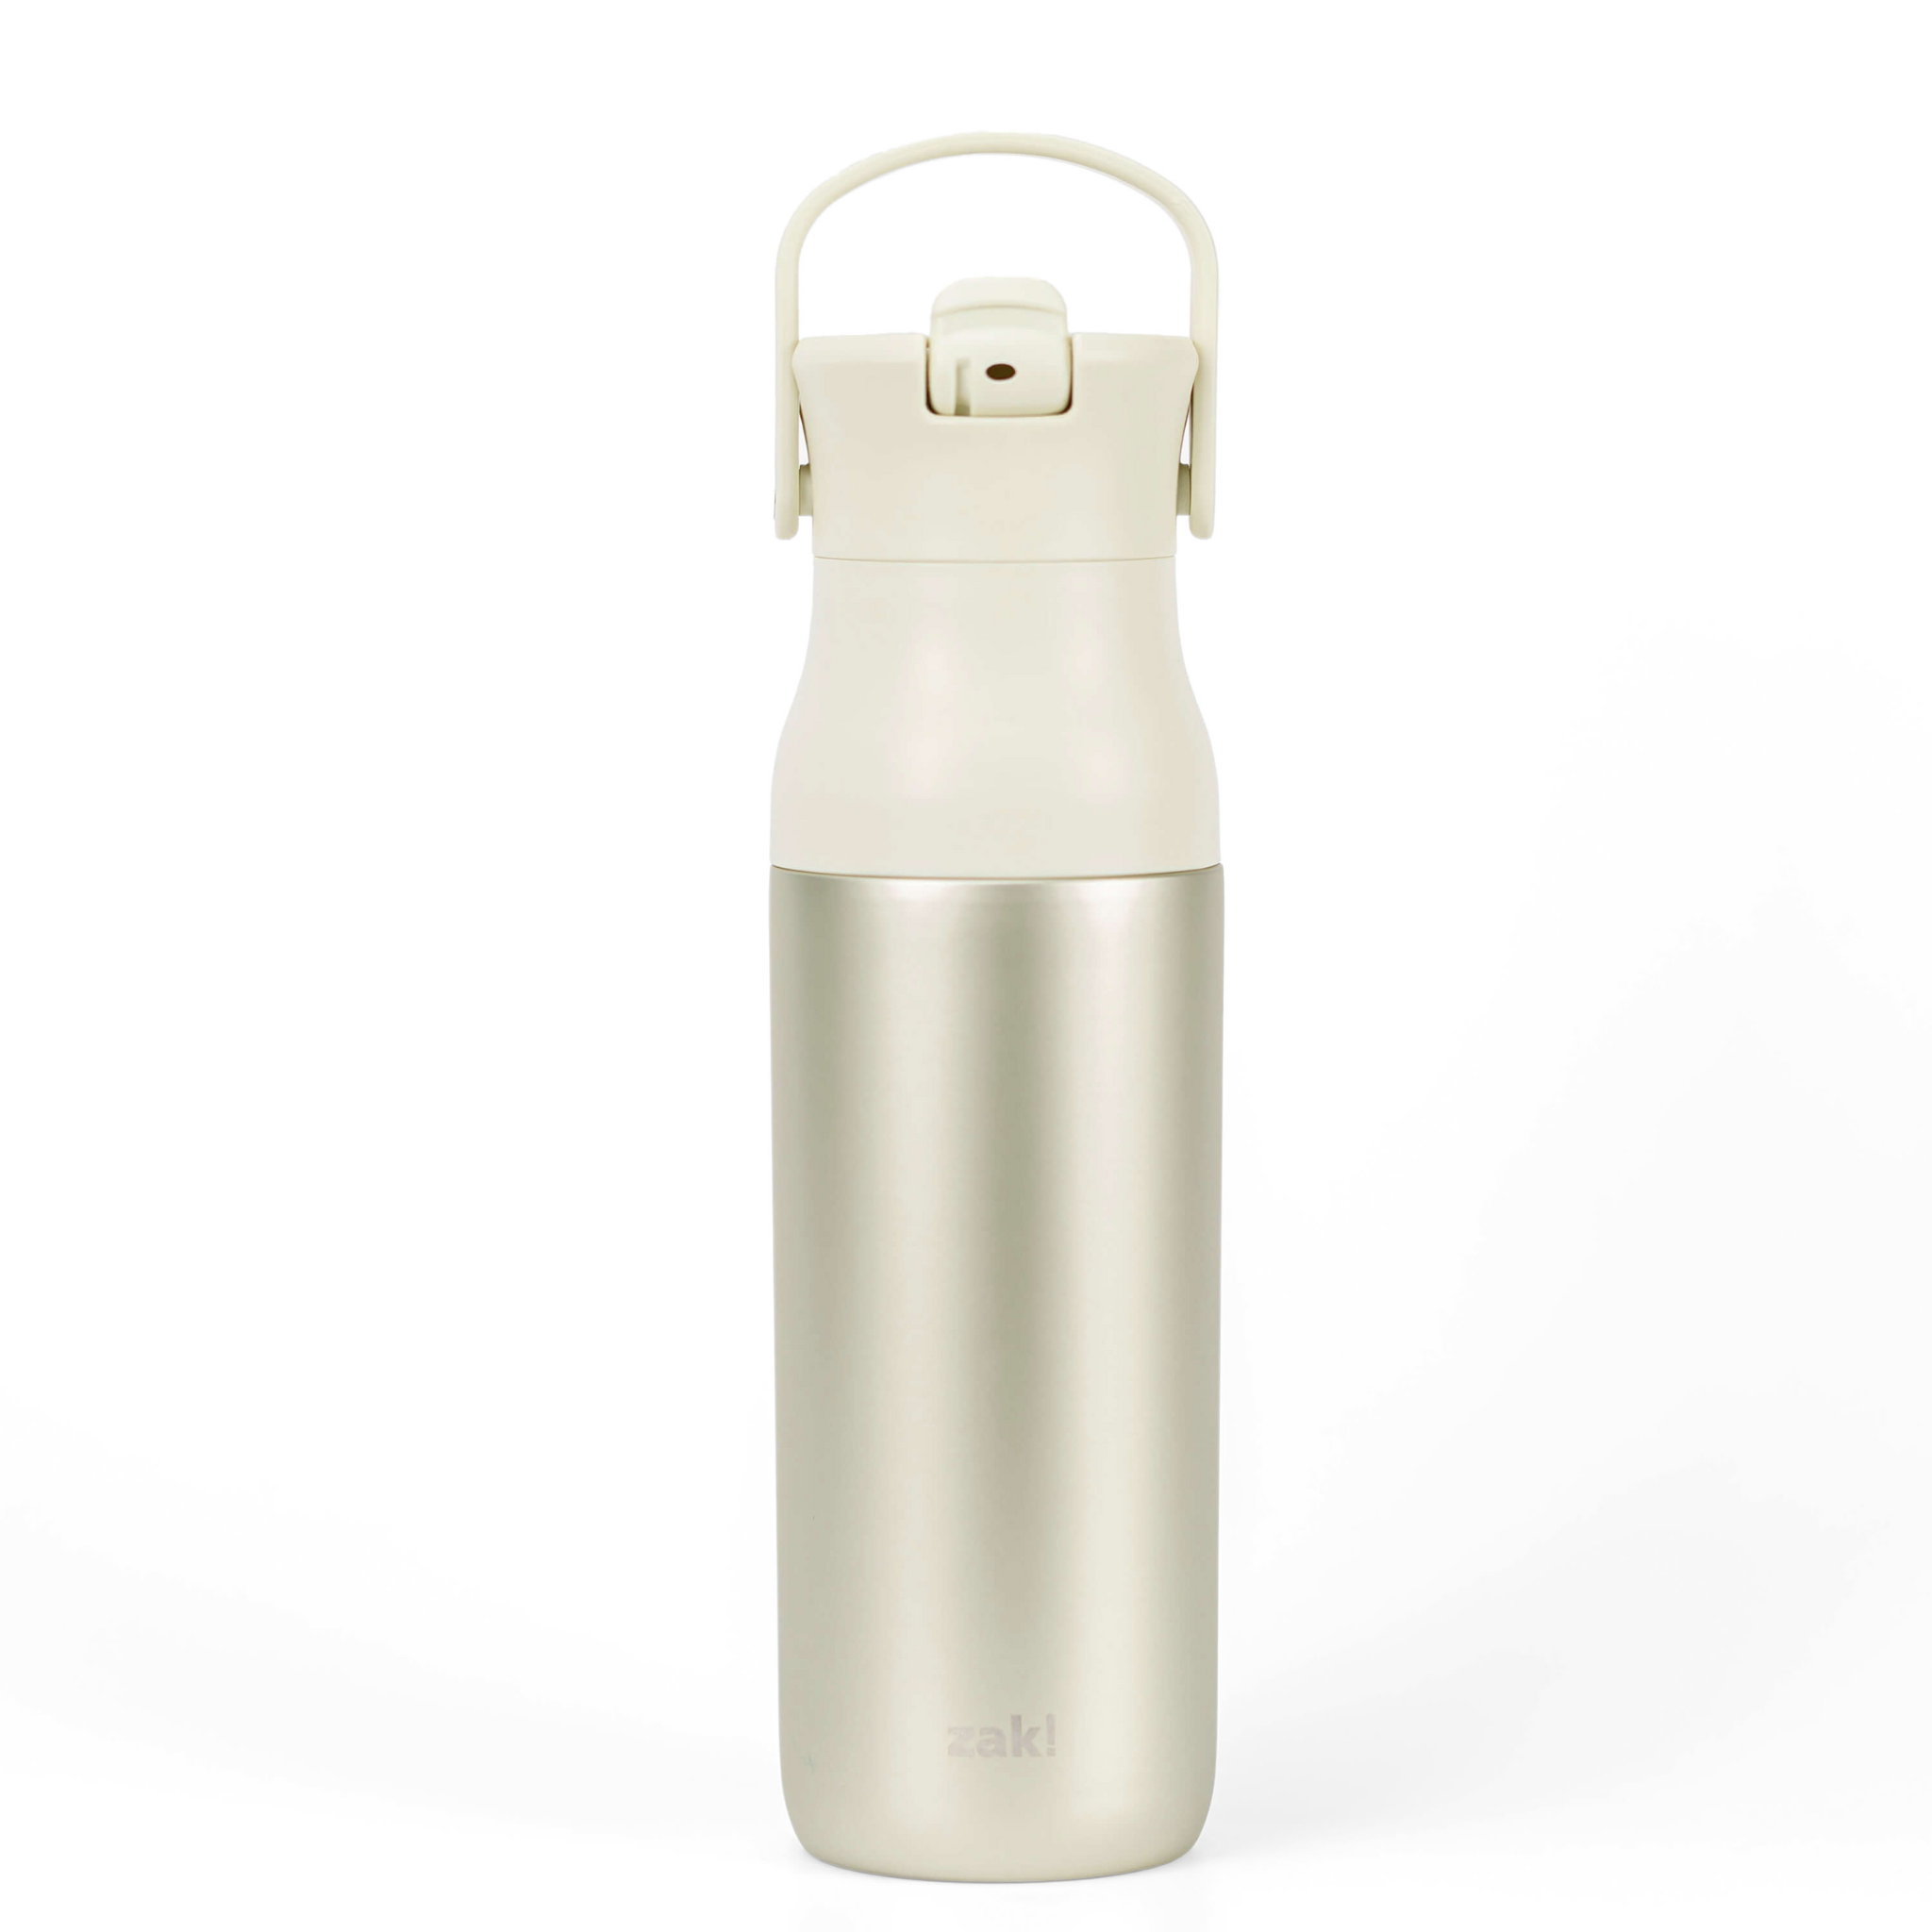 Harmony Recycled Stainless Steel Insulated Water Bottle with Flip-Up Straw Spout - Ivory, 32 ounces